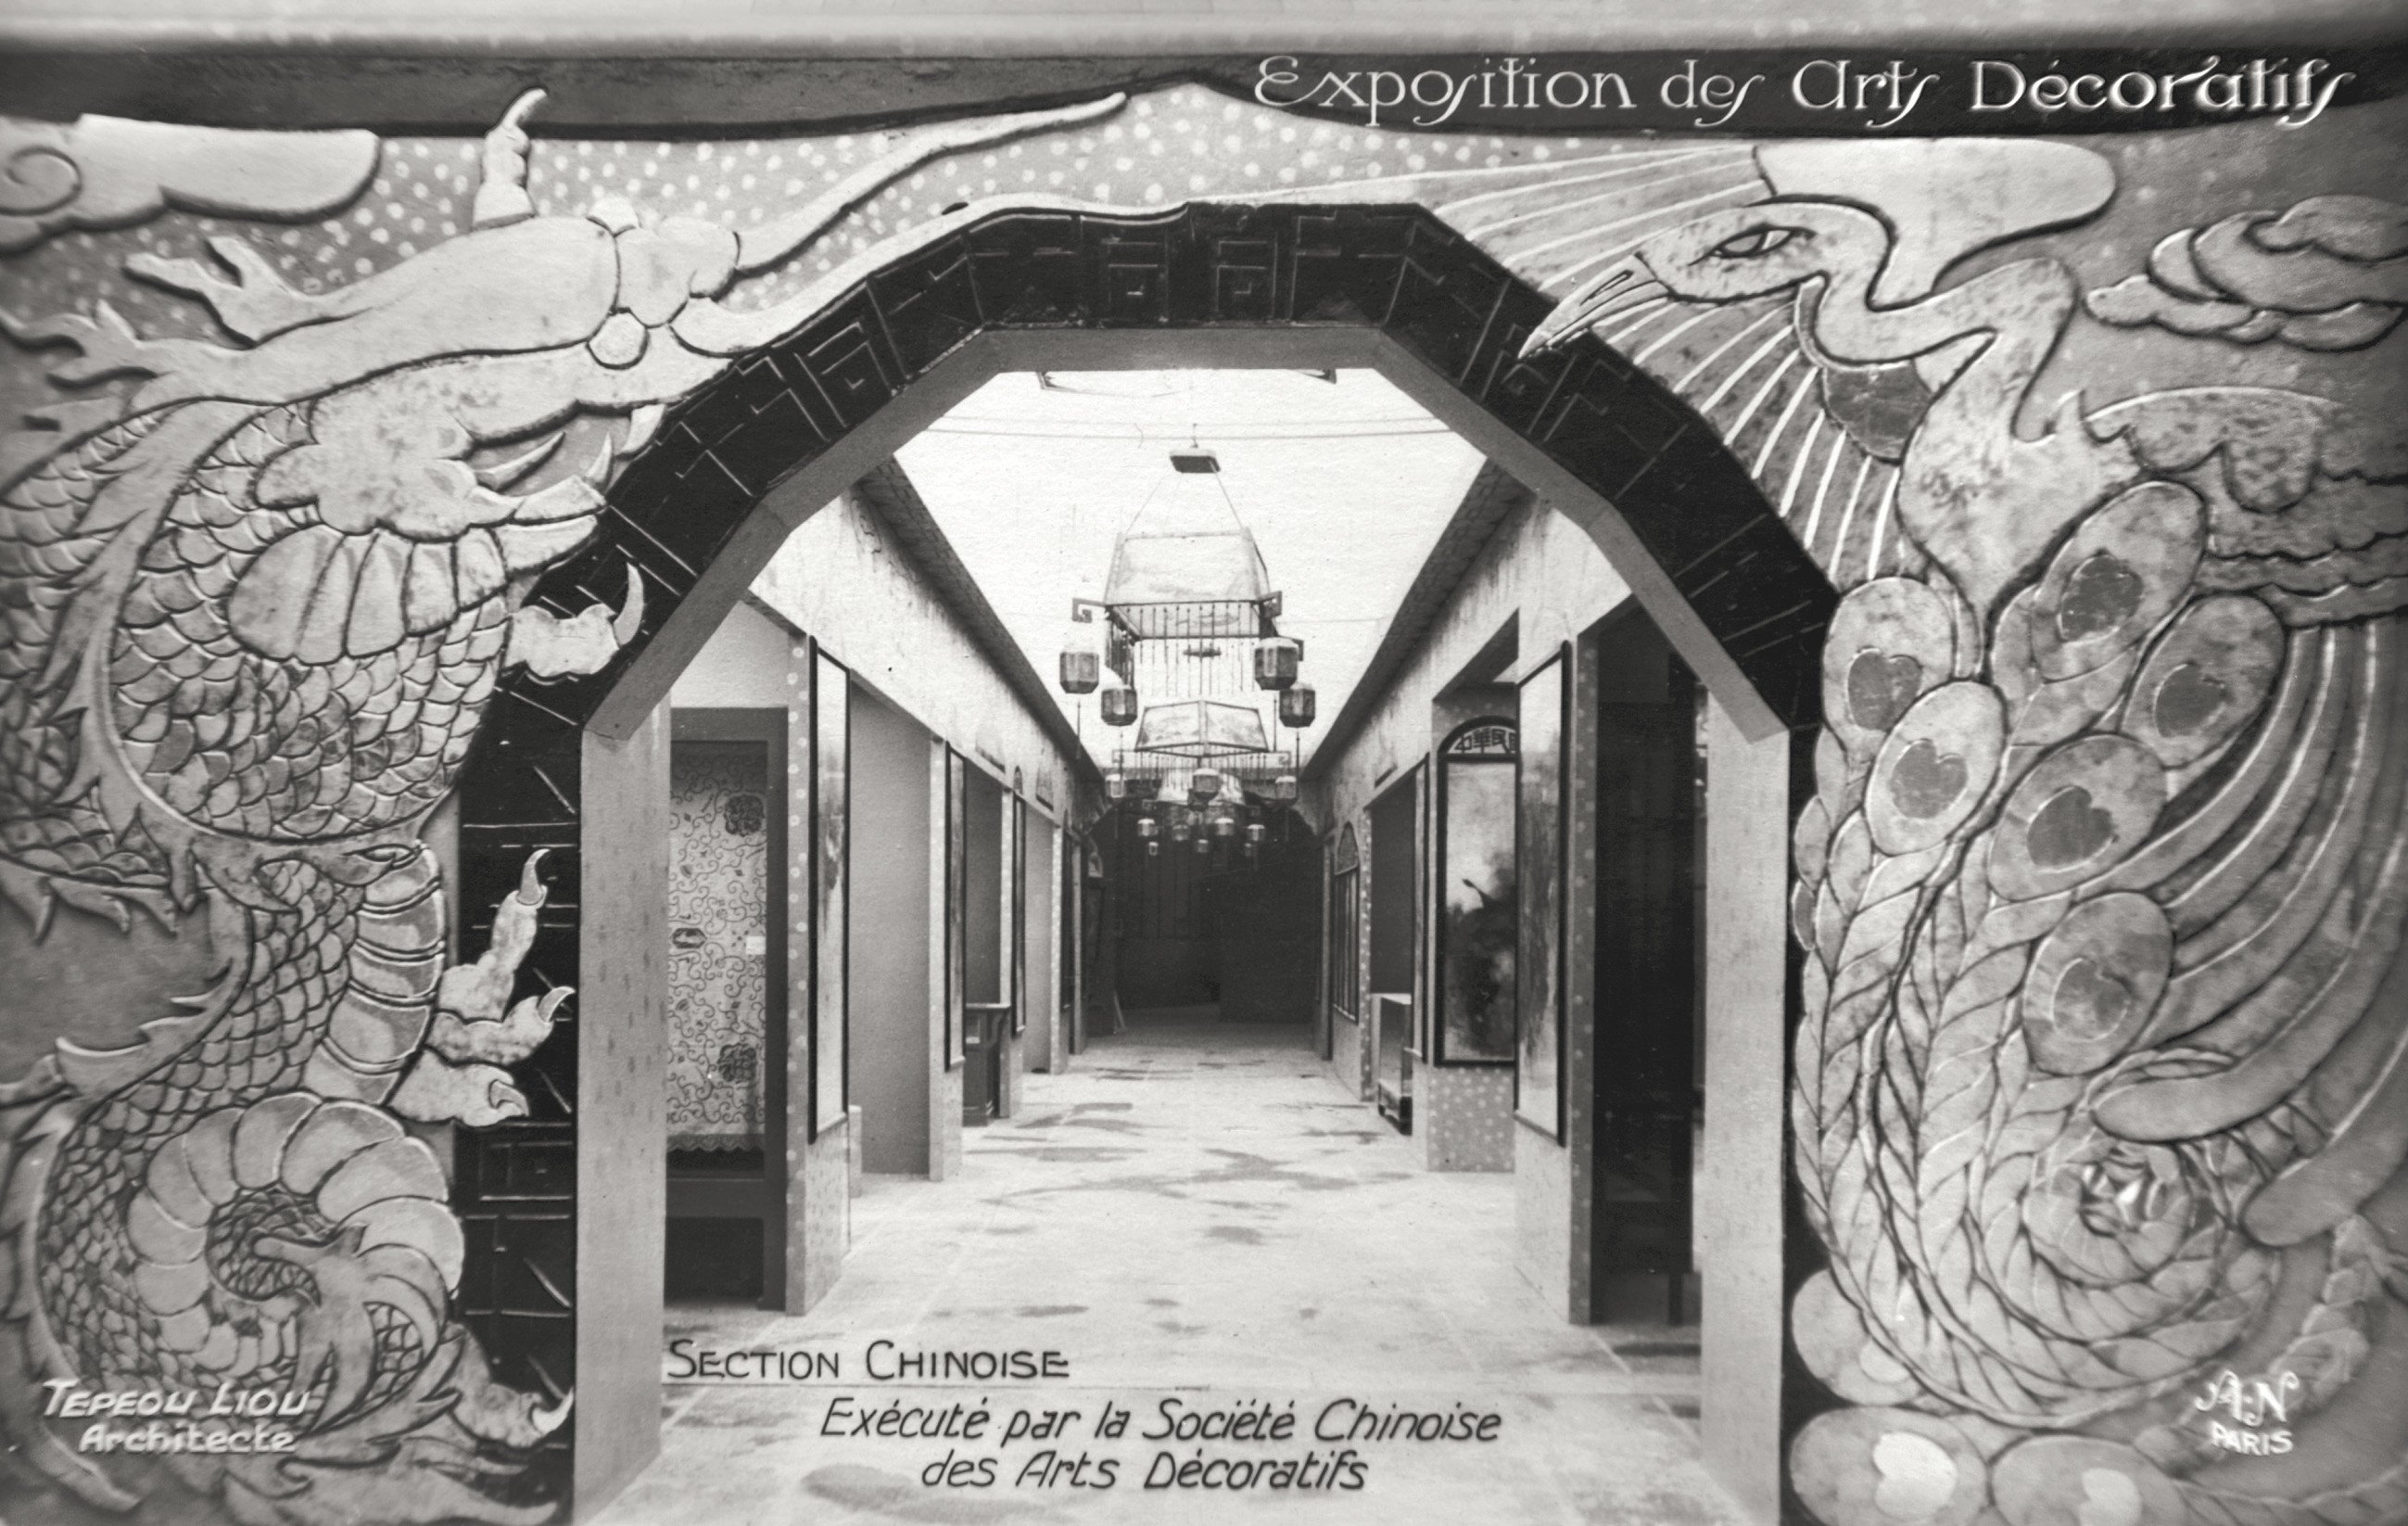 Work by Liu Jipiao, known as the father of Chinese art deco, at the 1925 Paris International Exhibition of Modern Decorative and Industrial Arts.